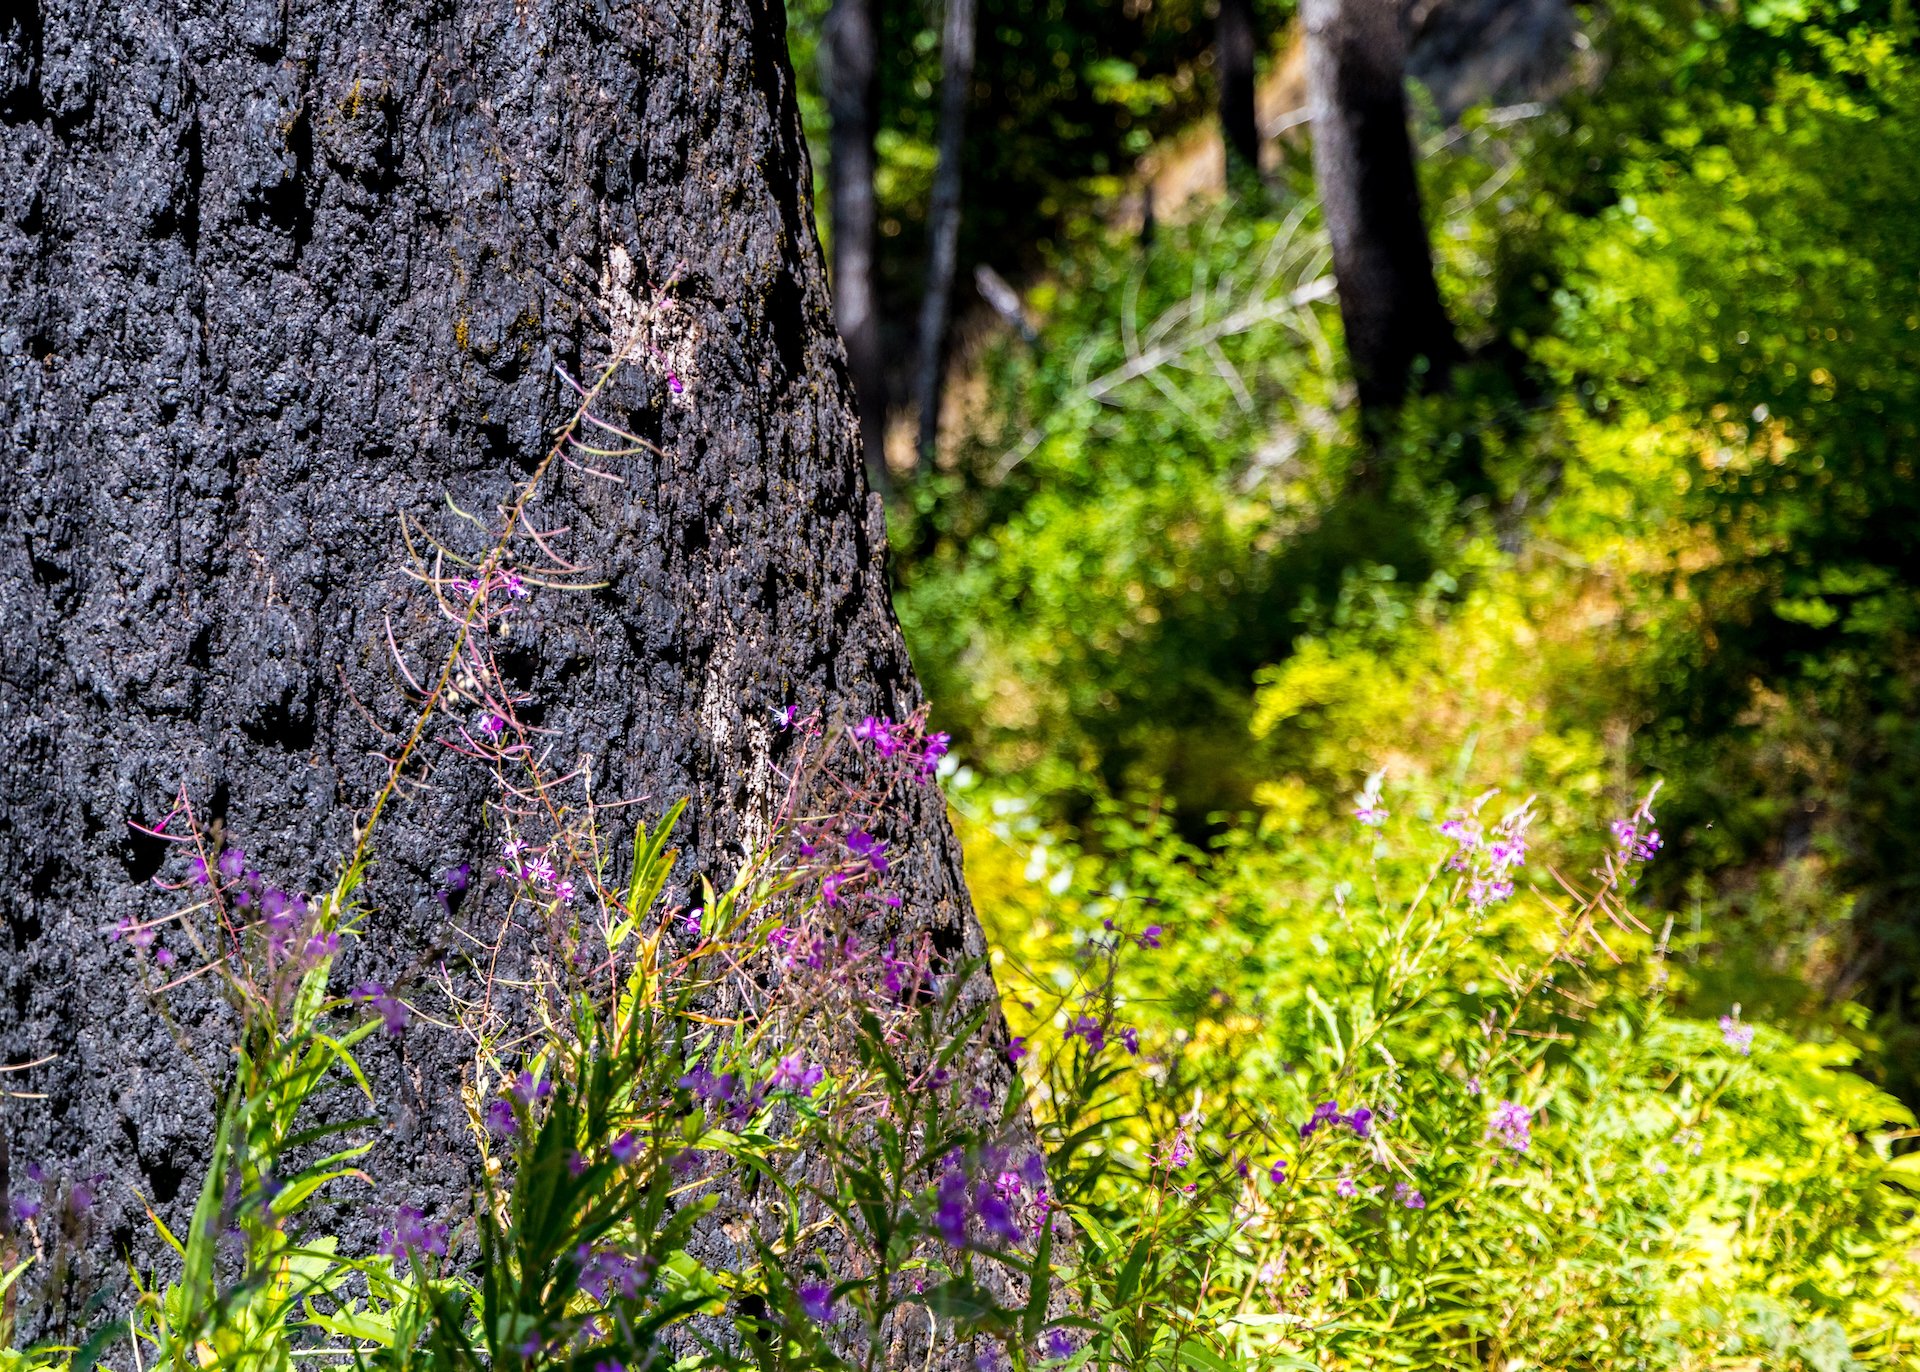  Fireweed and scorched trees.  